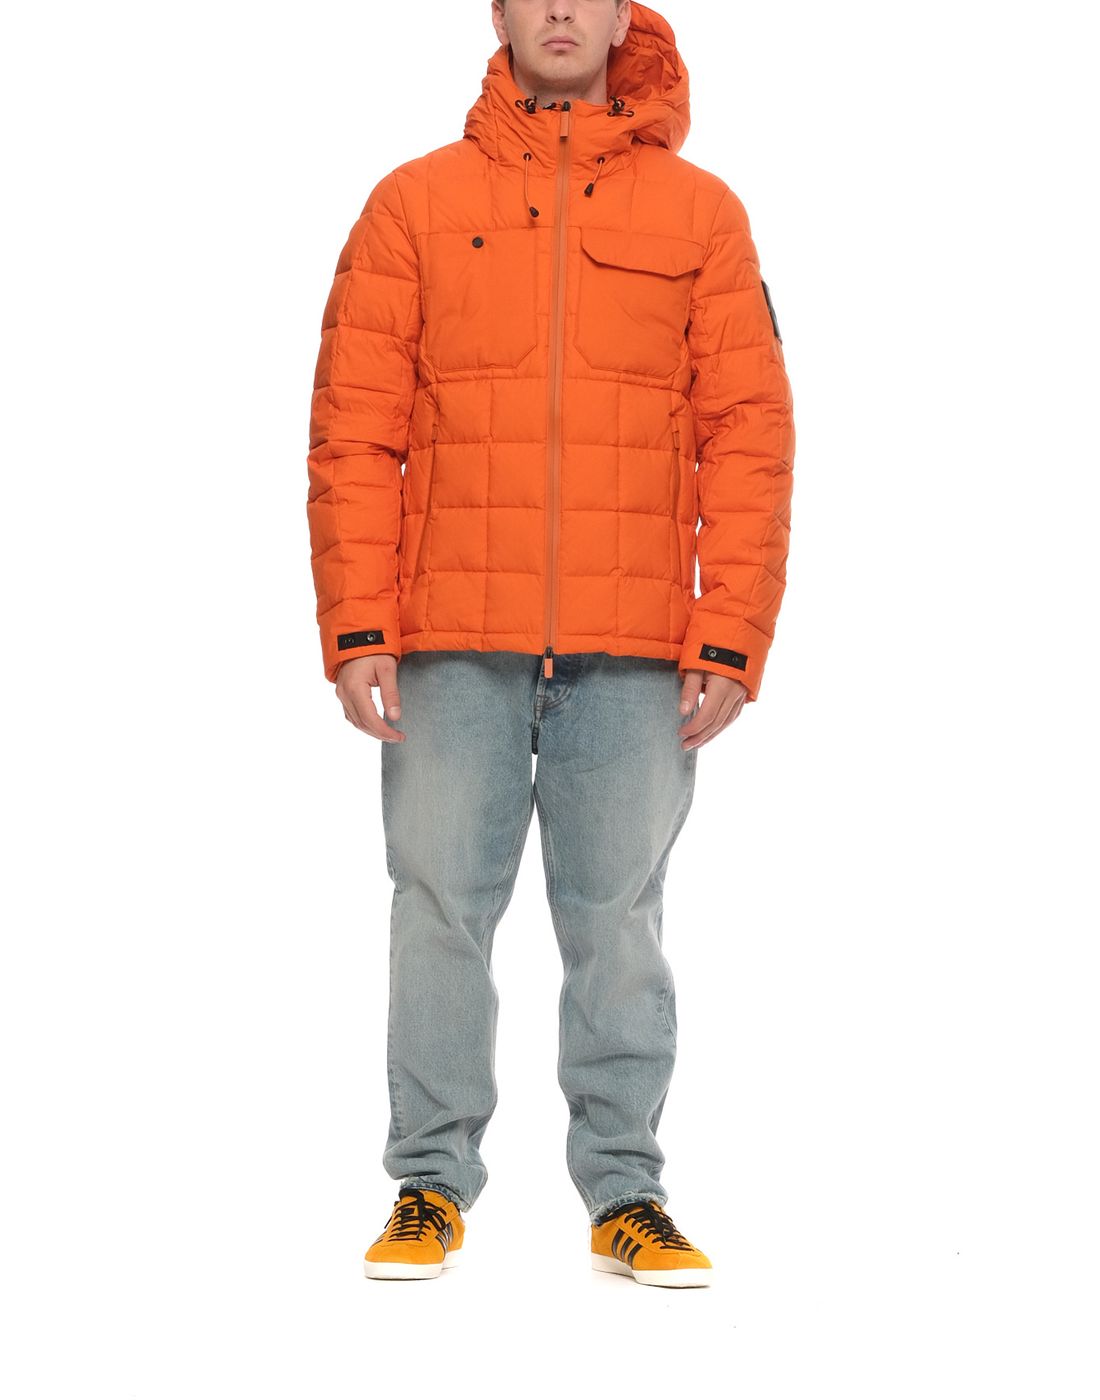 Veste homme iotm590ad34-rd 382 orange out there